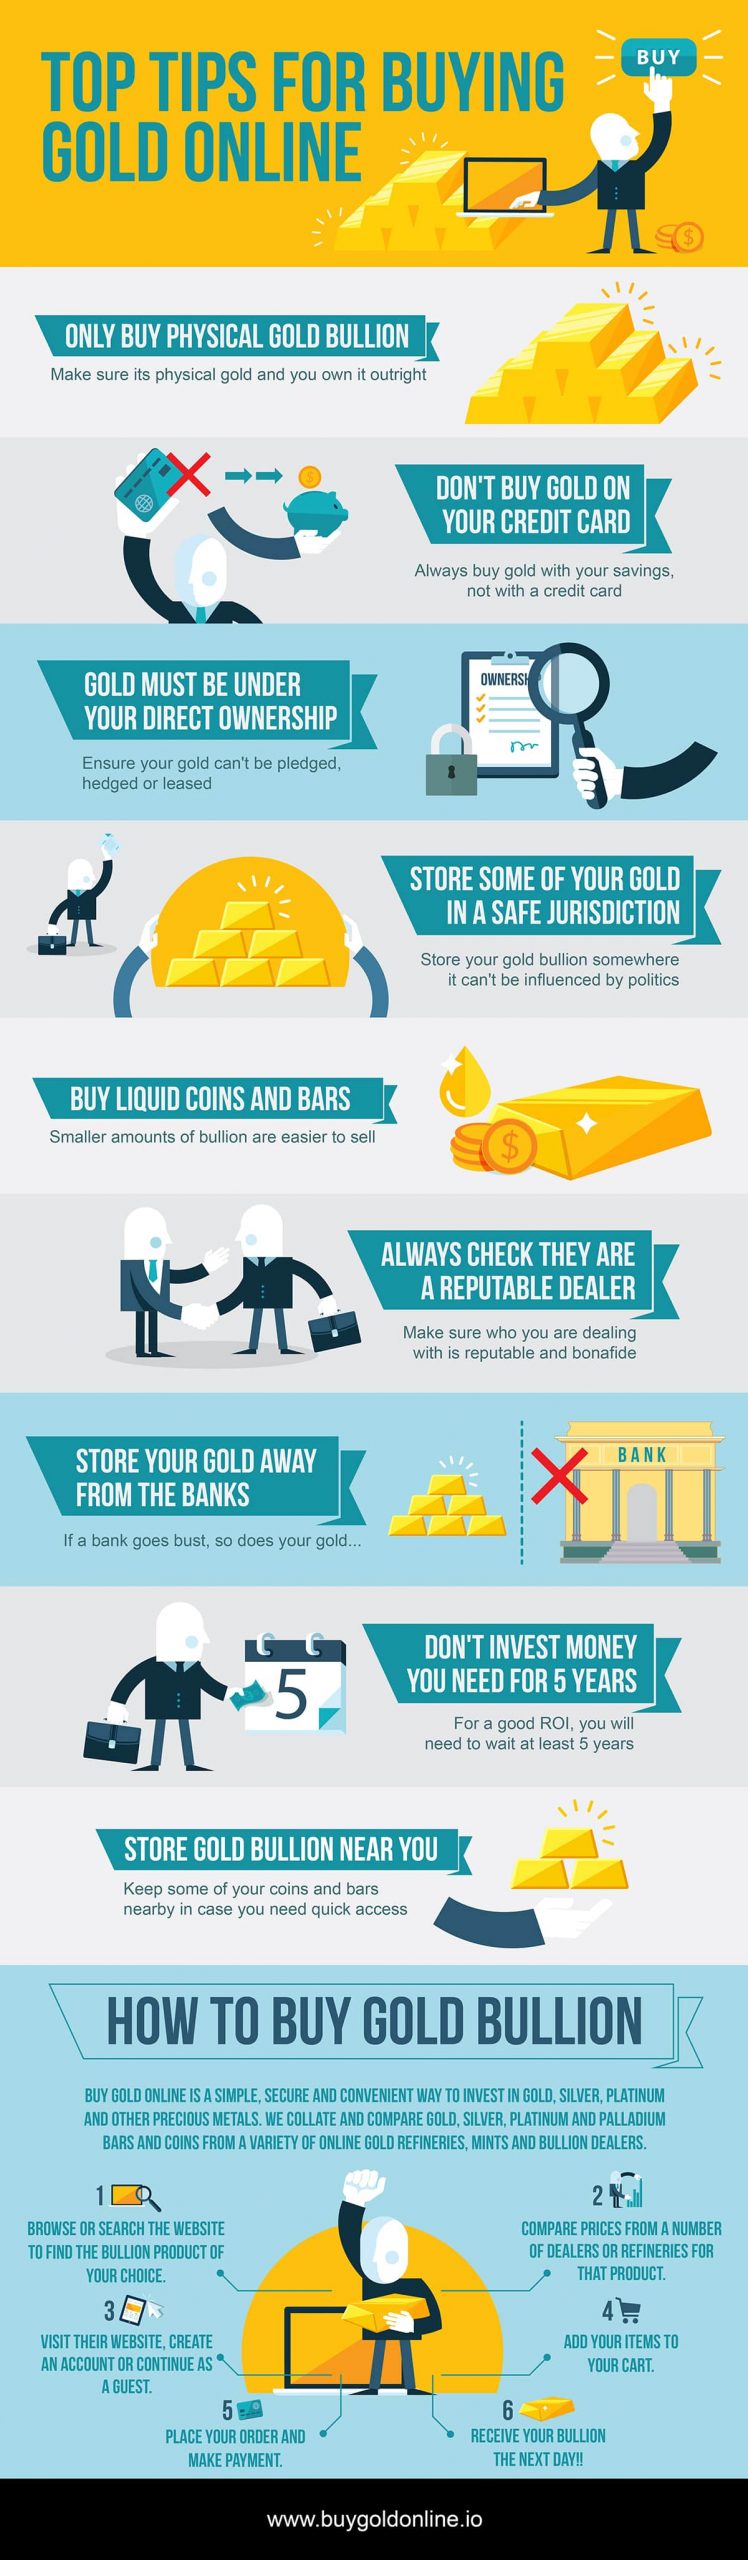 Top Tips To Safely Buy Gold Online